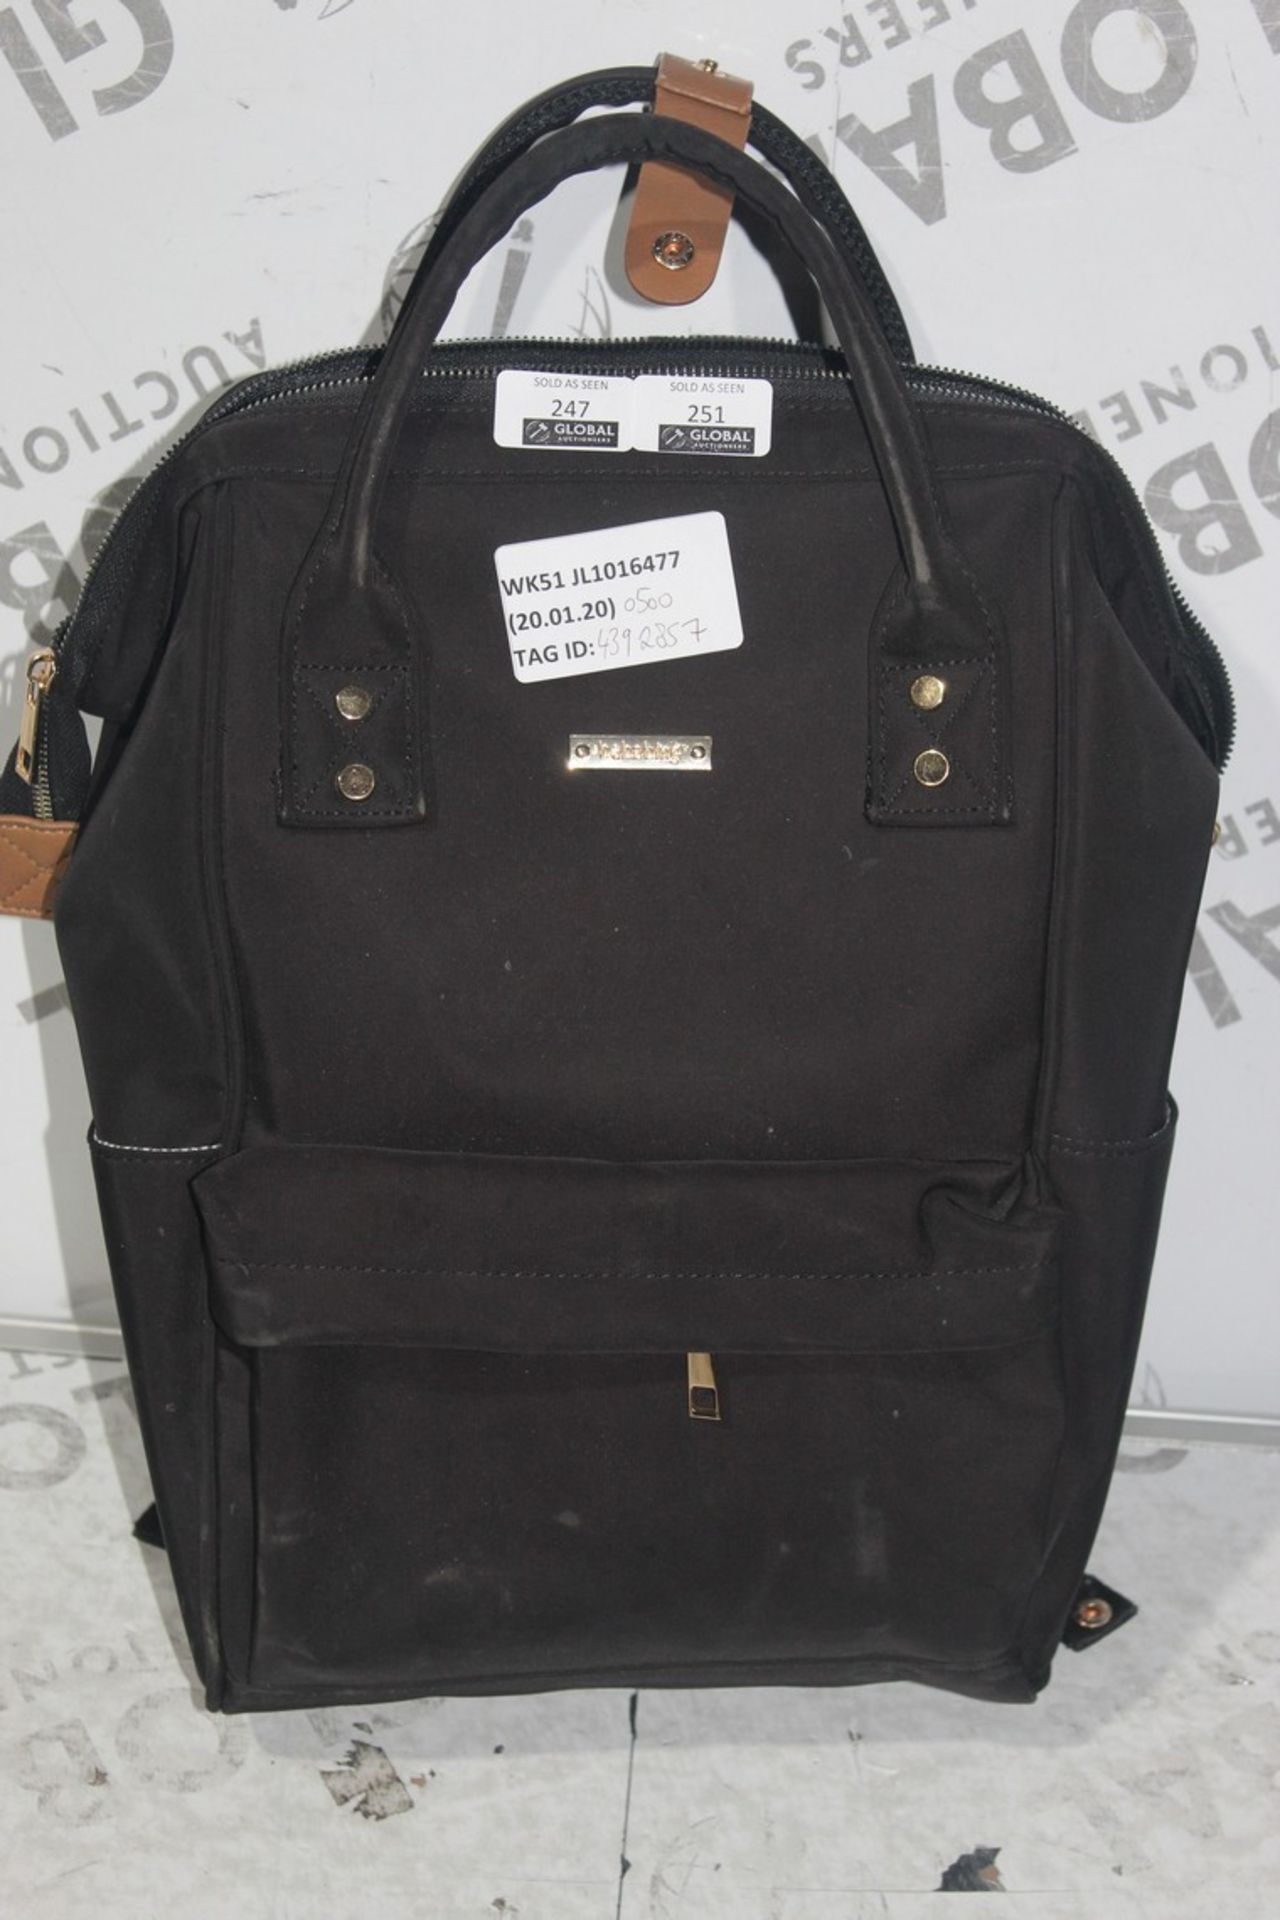 BaBaBing Black Fabric Children's Changing Bag RRP £50 Each (4392897)(RET00658181) (Public Viewing